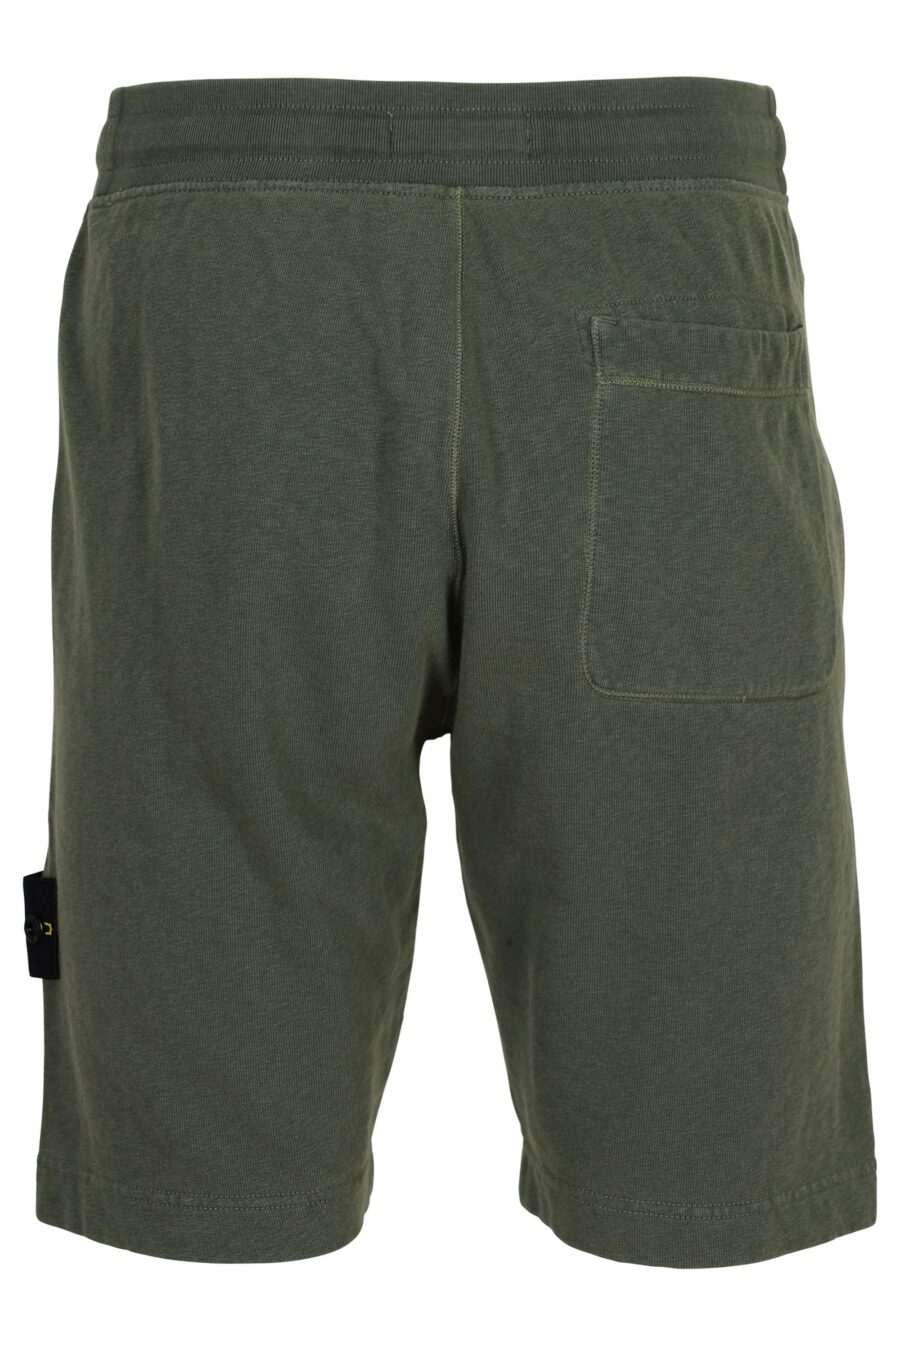 Military green tracksuit bottoms with logo compass patch - 8052572902062 1